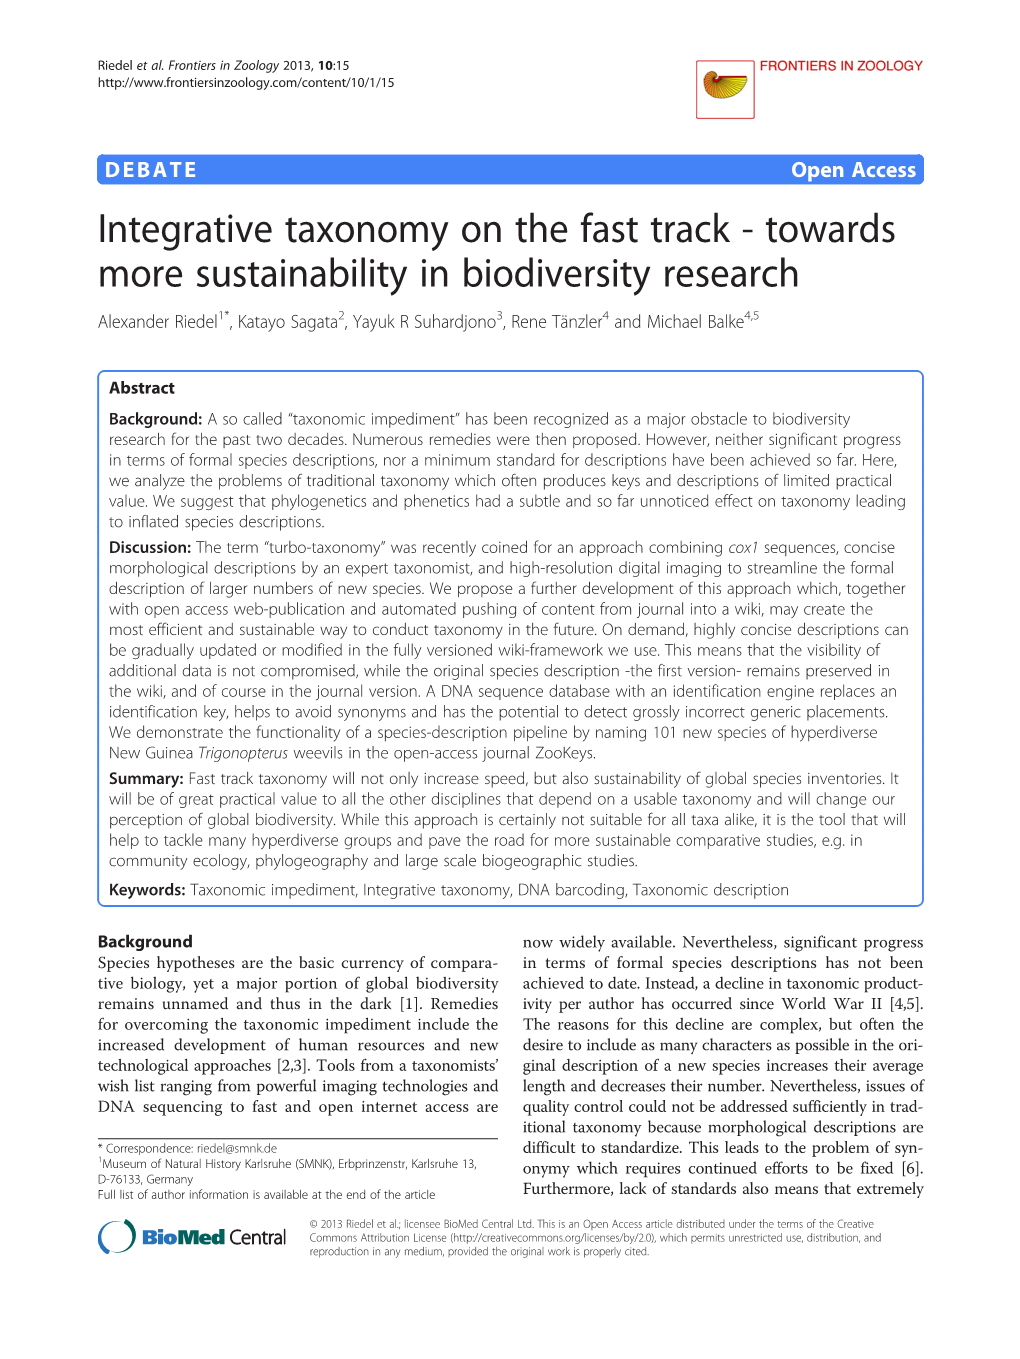 Integrative Taxonomy on the Fast Track-Towards More Sustainability In